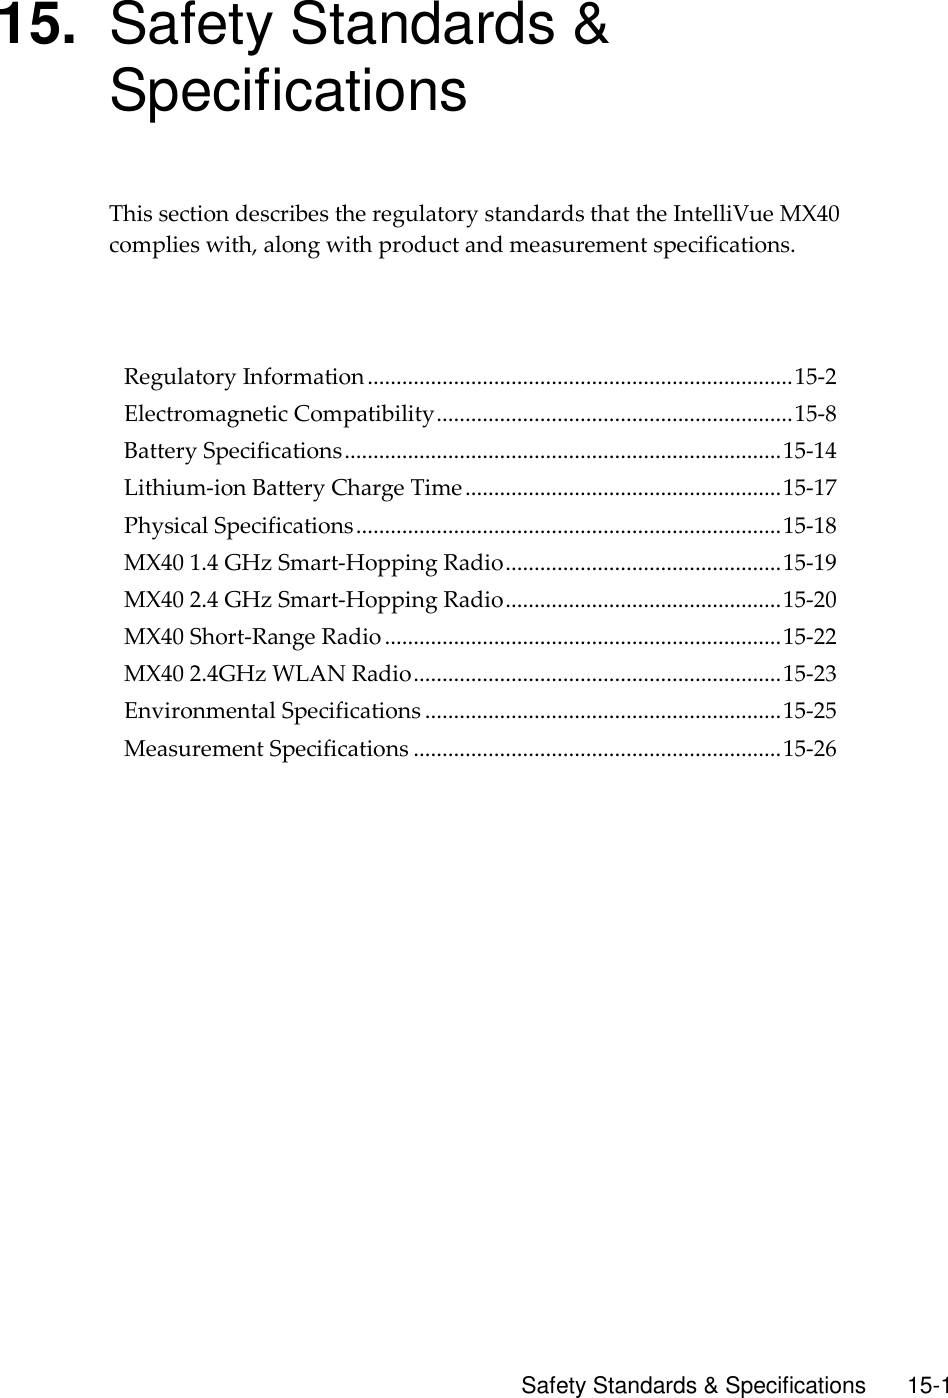      Safety Standards &amp; Specifications        15-1 15. Safety Standards &amp; Specifications This section describes the regulatory standards that the IntelliVue MX40 complies with, along with product and measurement specifications.      Regulatory Information .......................................................................... 15-2 Electromagnetic Compatibility .............................................................. 15-8 Battery Specifications ............................................................................ 15-14 Lithium-ion Battery Charge Time ....................................................... 15-17 Physical Specifications .......................................................................... 15-18 MX40 1.4 GHz Smart-Hopping Radio ................................................ 15-19 MX40 2.4 GHz Smart-Hopping Radio ................................................ 15-20 MX40 Short-Range Radio ..................................................................... 15-22 MX40 2.4GHz WLAN Radio ................................................................ 15-23 Environmental Specifications .............................................................. 15-25 Measurement Specifications ................................................................ 15-26   